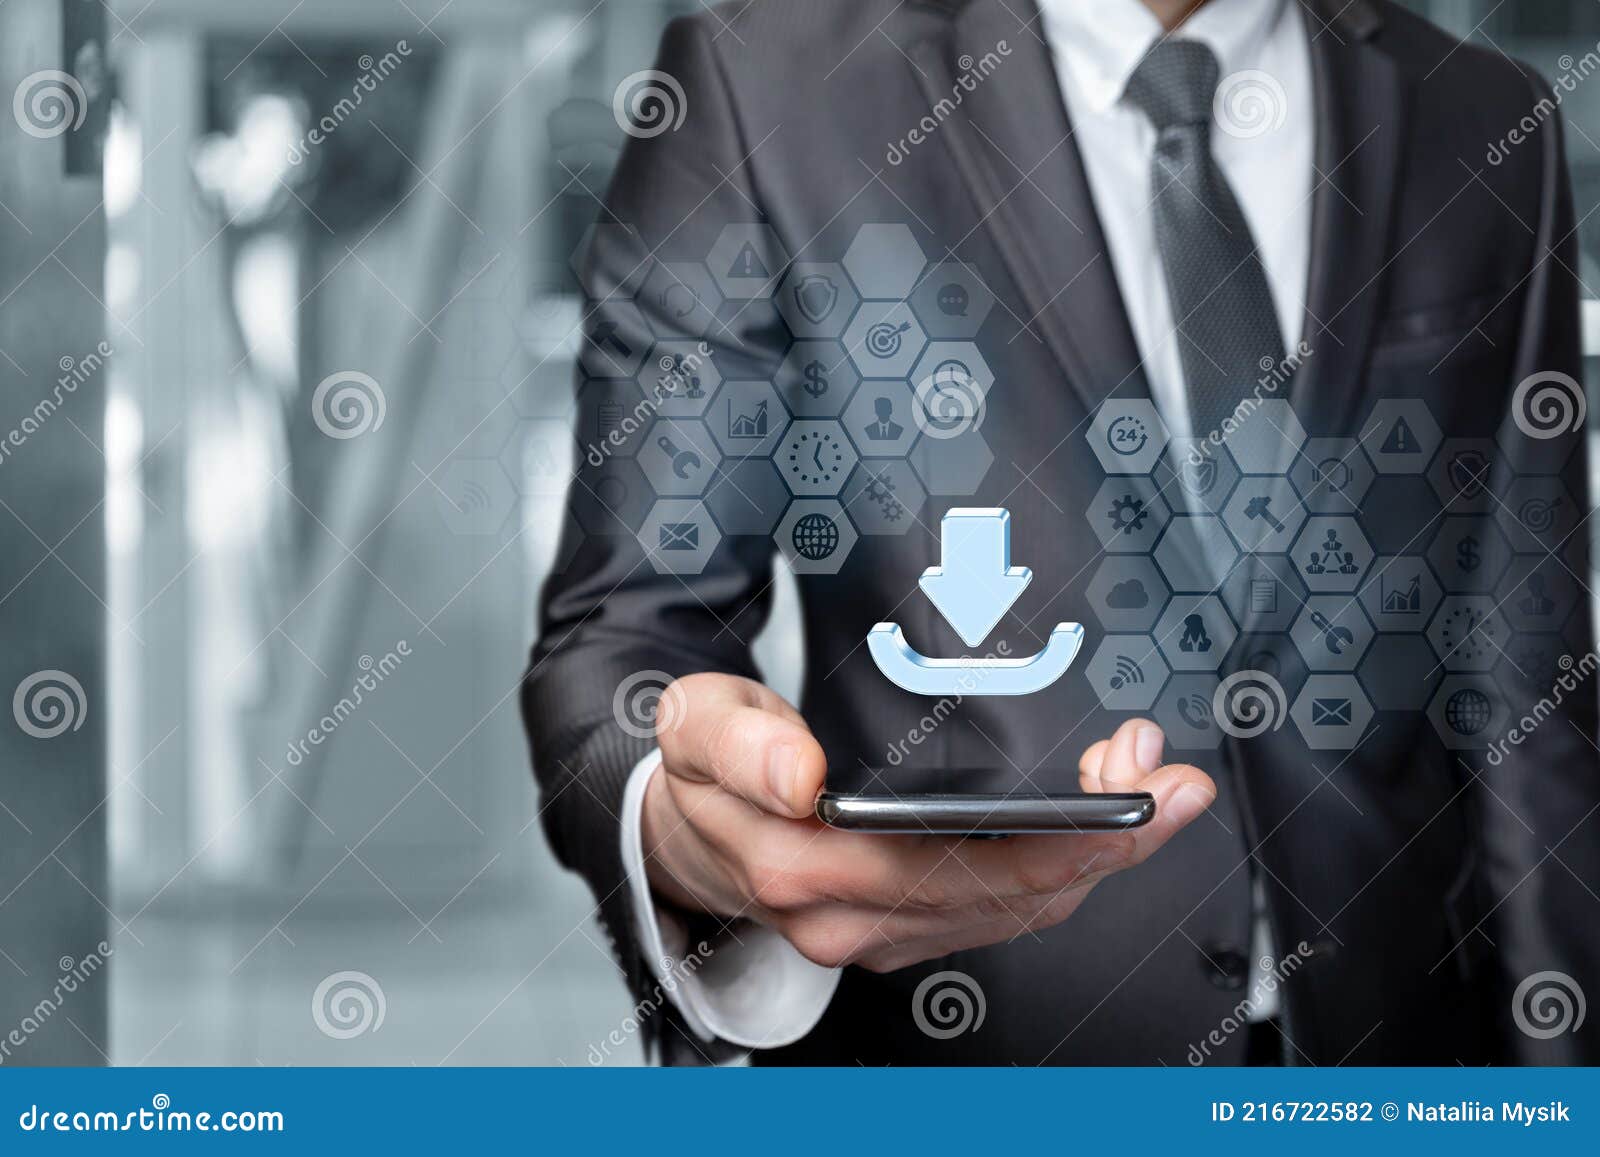 businessman downloads information to a mobile device on a blurred background